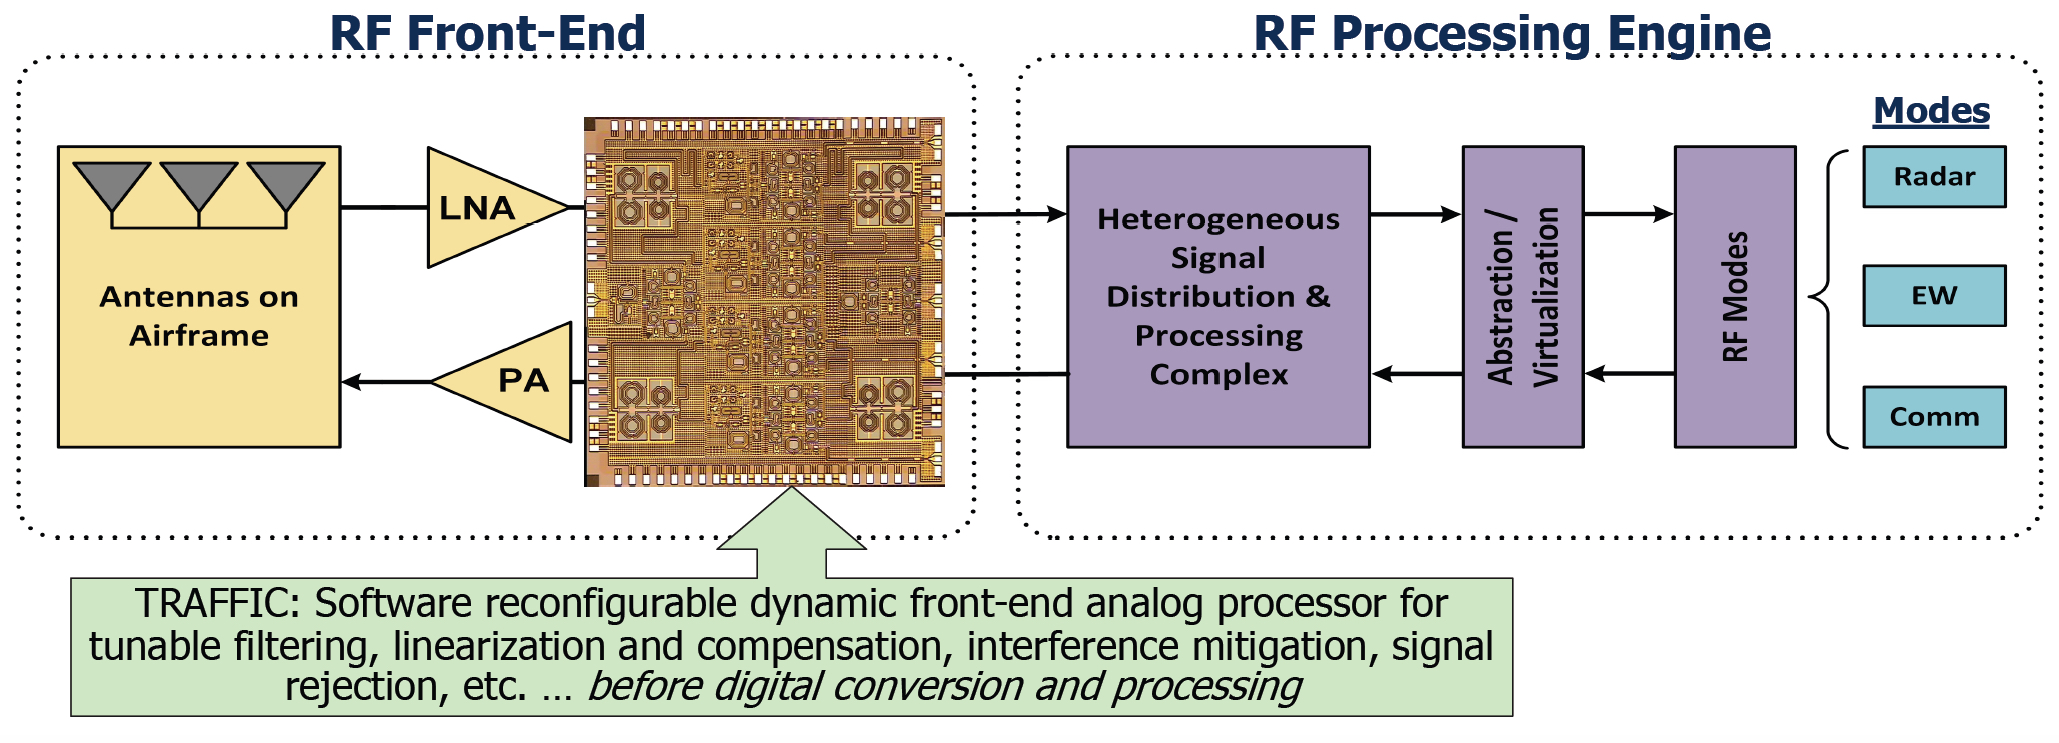 Diagram of RF front-end, including a box with antennas on airframe with an arrow to TRAFFIC as the software reconfigurable dynamic front-end analog processor. Diagram includes the RF processing engine with RF modes (radar, EW, comm). 